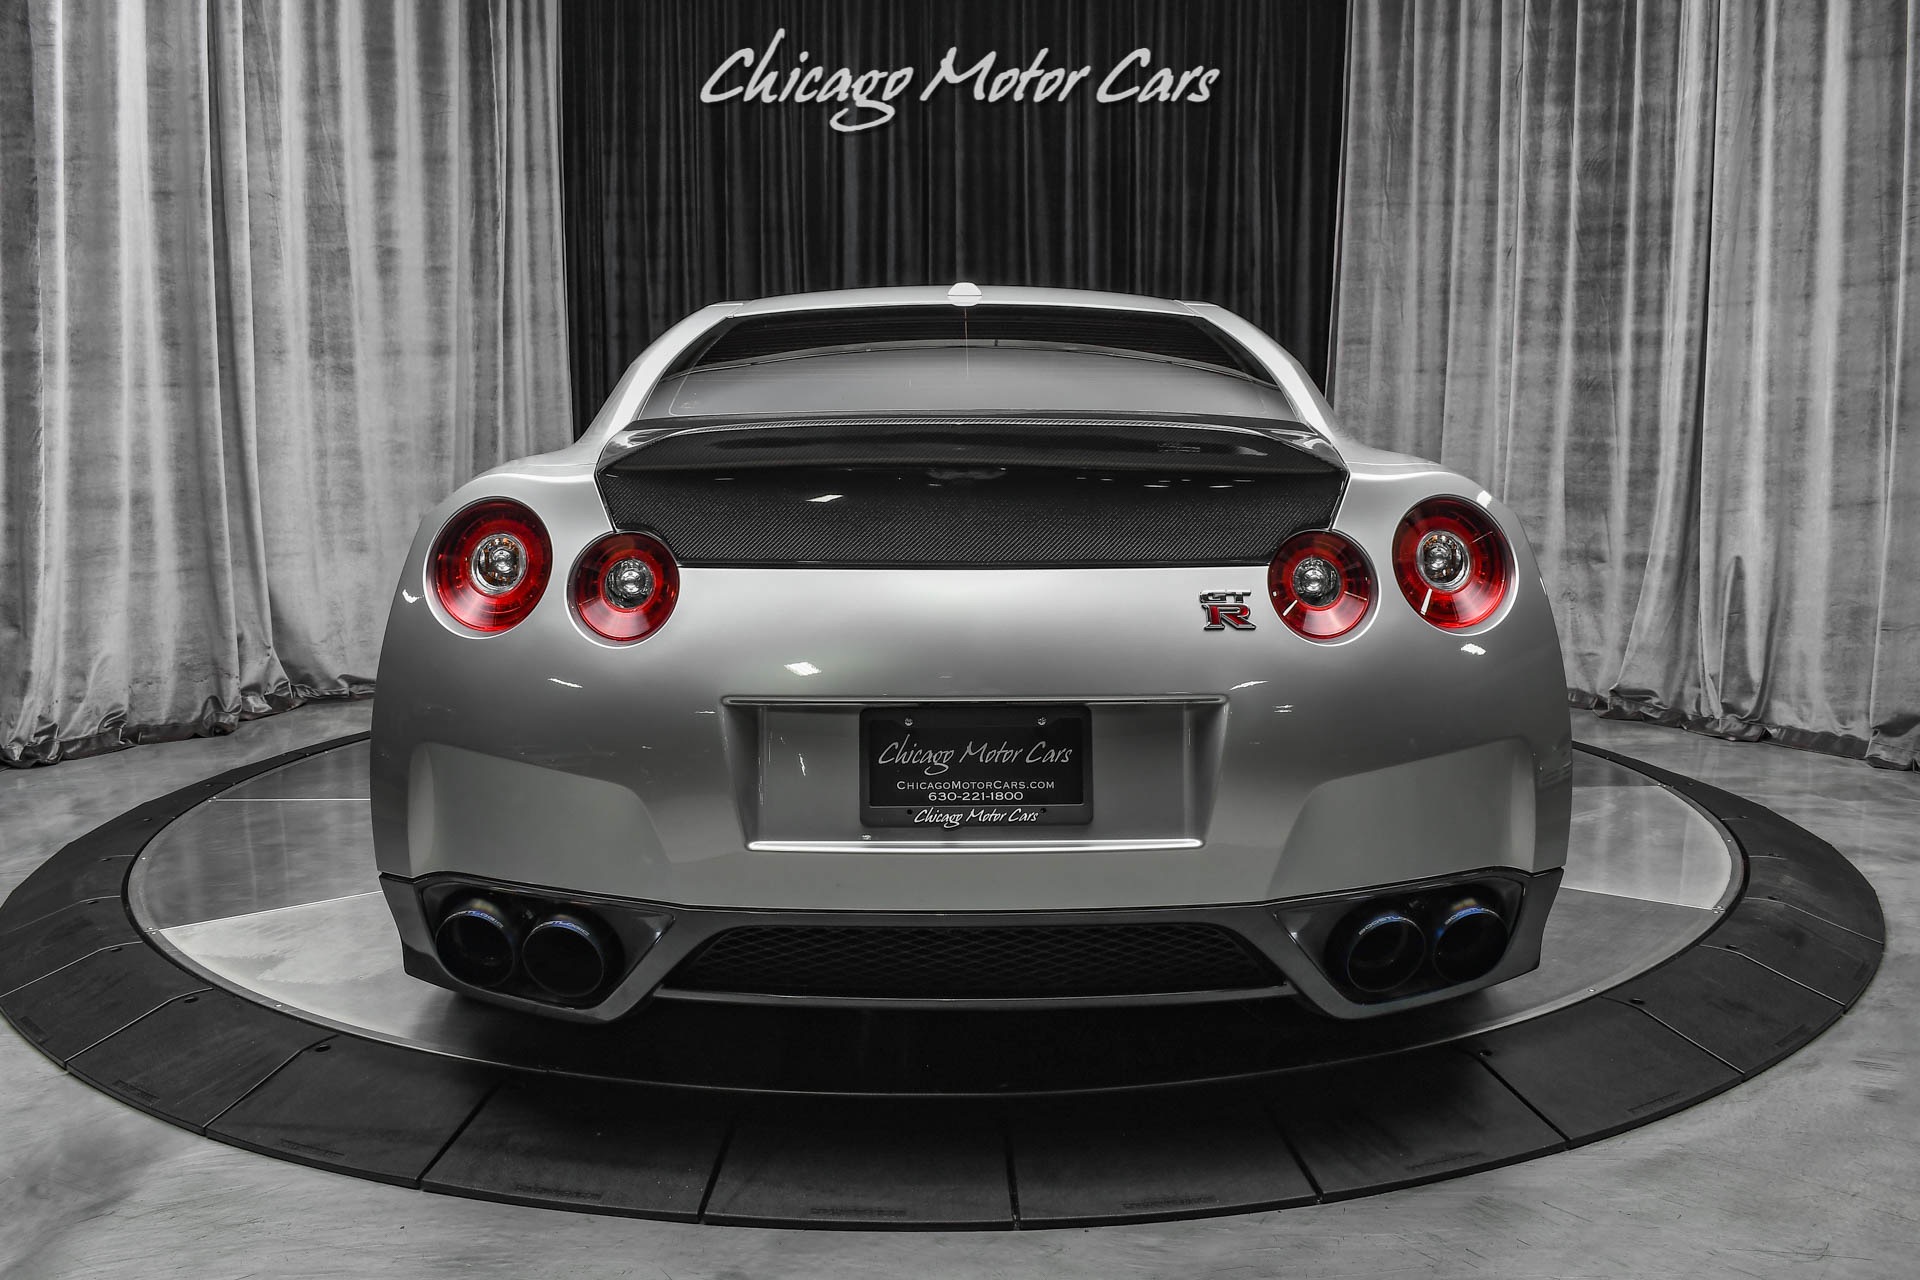 Used 11 Nissan Gt R Premium Coupe 1 0 Whp Alpha 12x Motec Ecu Lmr Stage 2 3 8l Engine For Sale 114 800 Chicago Motor Cars Stock Bm